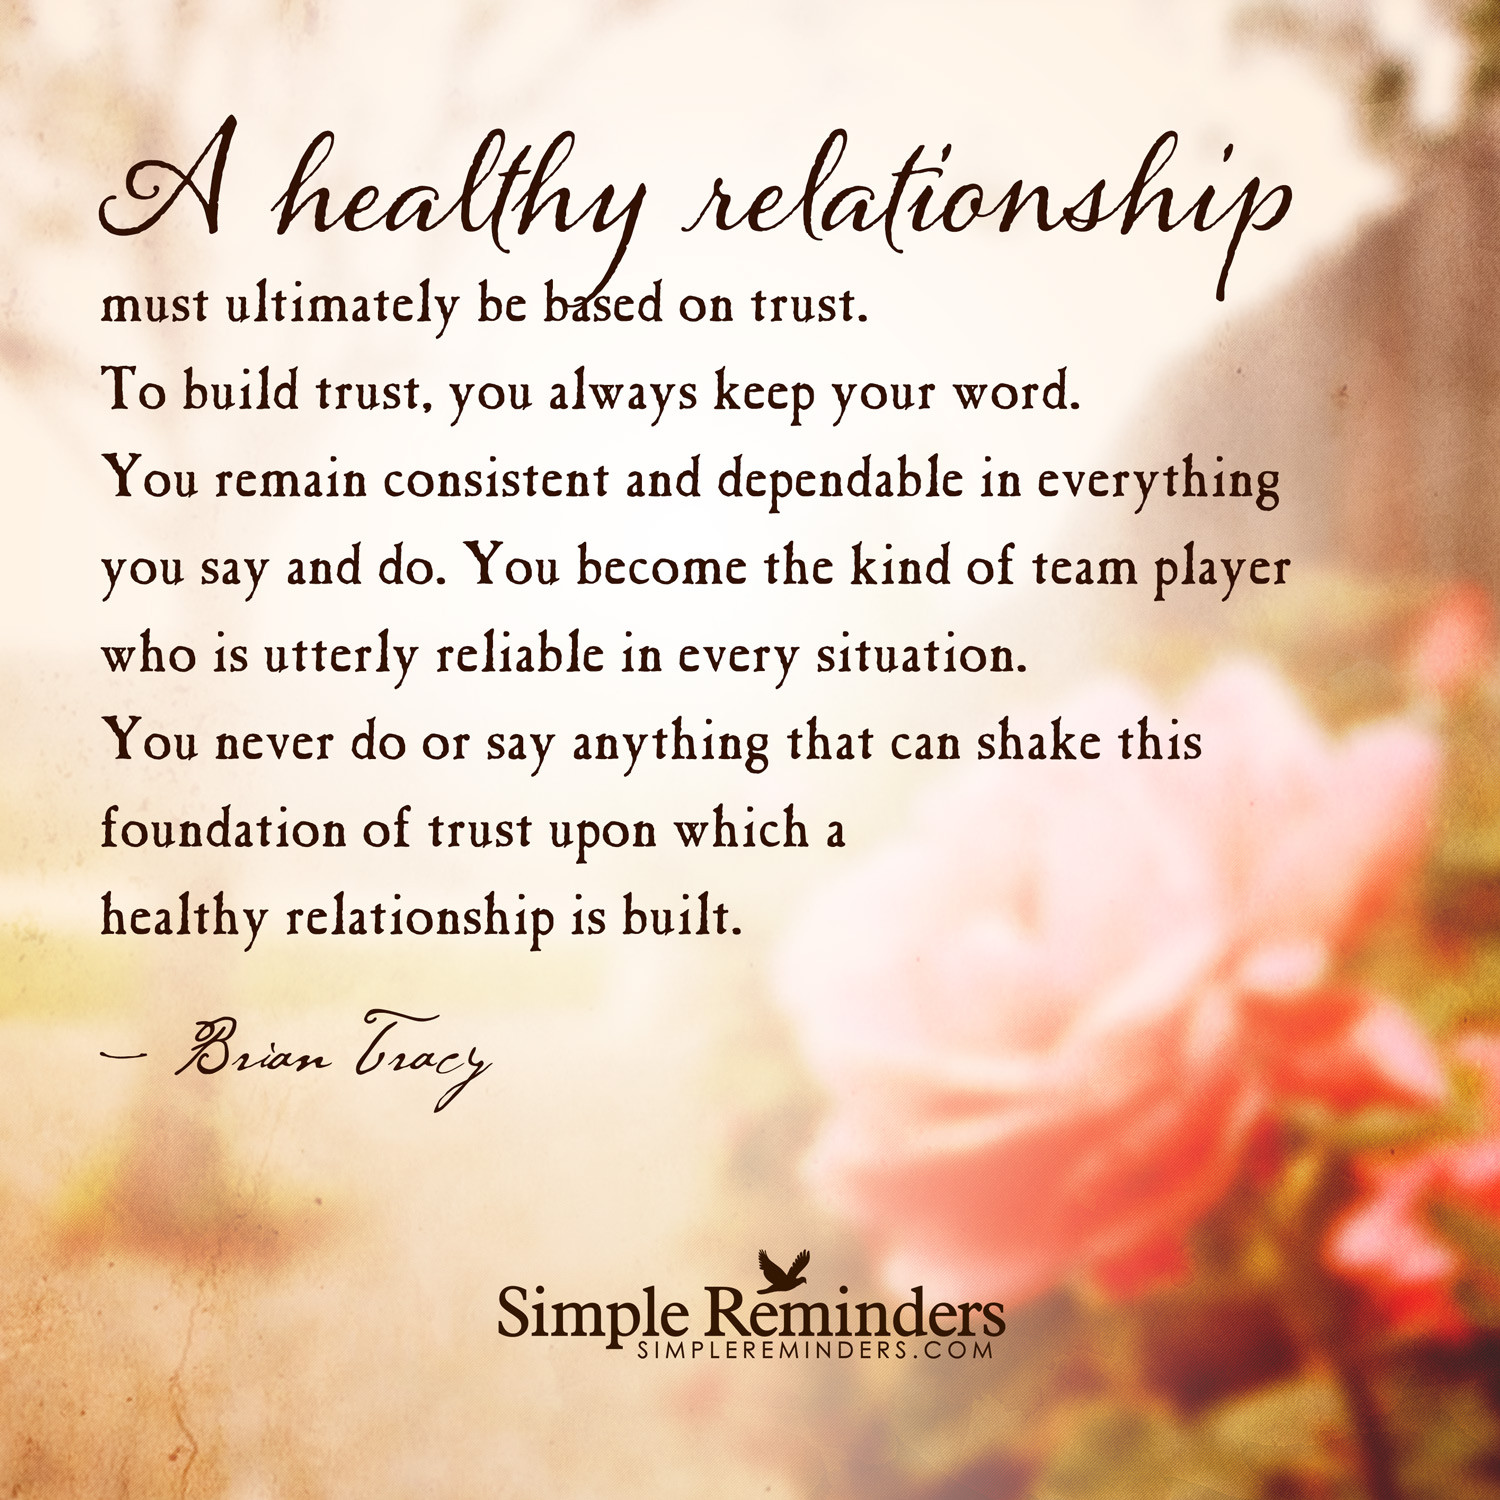 Quote About Trust In A Relationship
 Quotes About Healthy Relationships QuotesGram